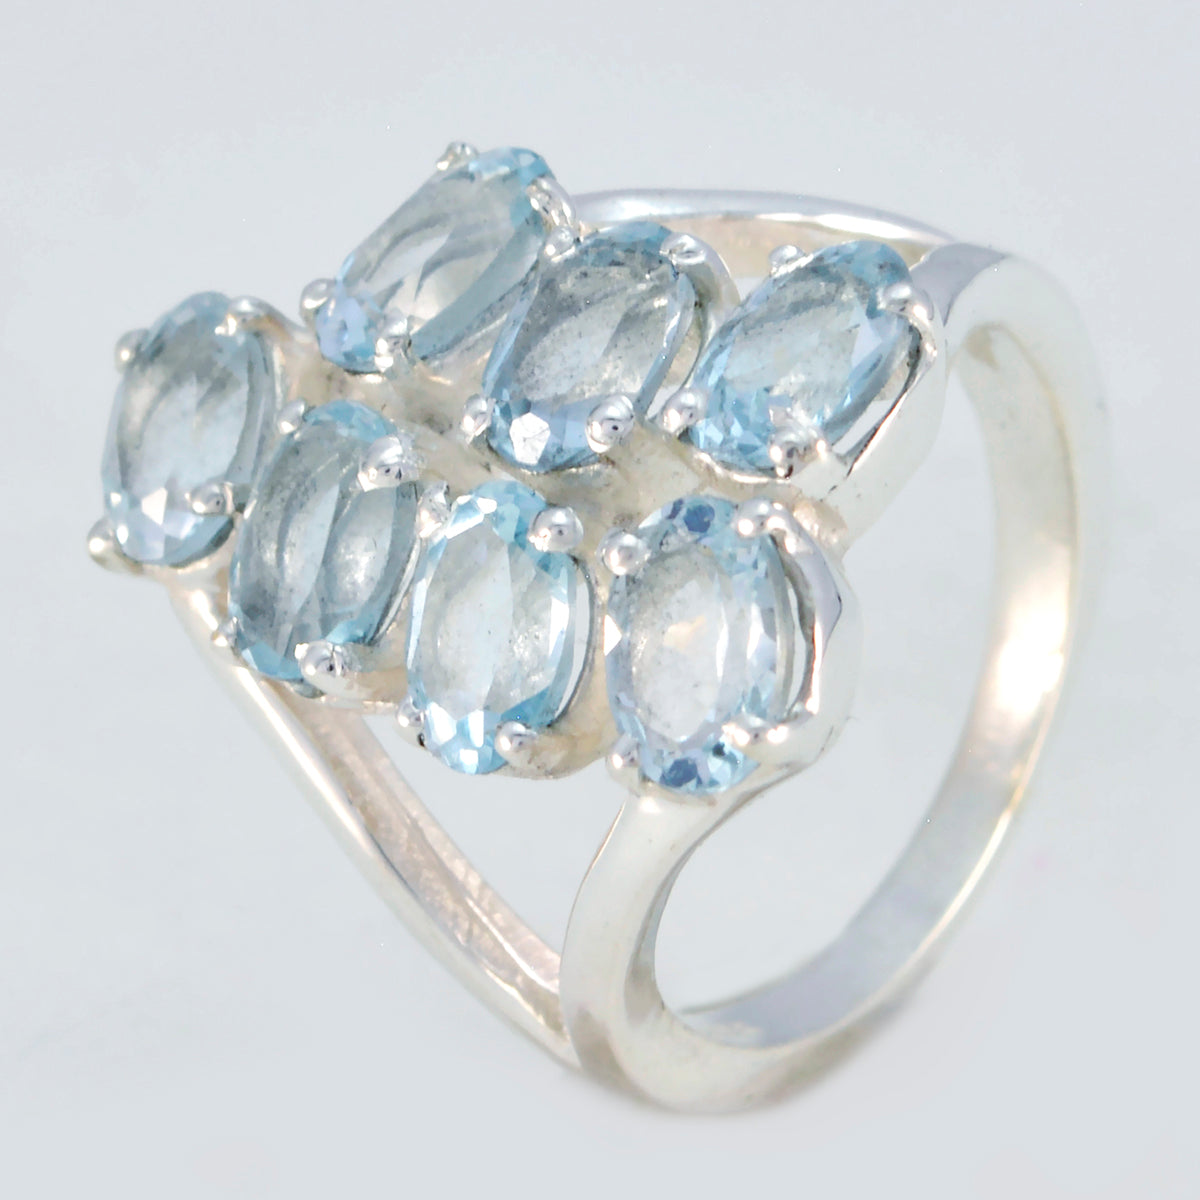 Well-Favoured Gem Blue Topaz 925 Silver Ring Kate Middleton Jewelry